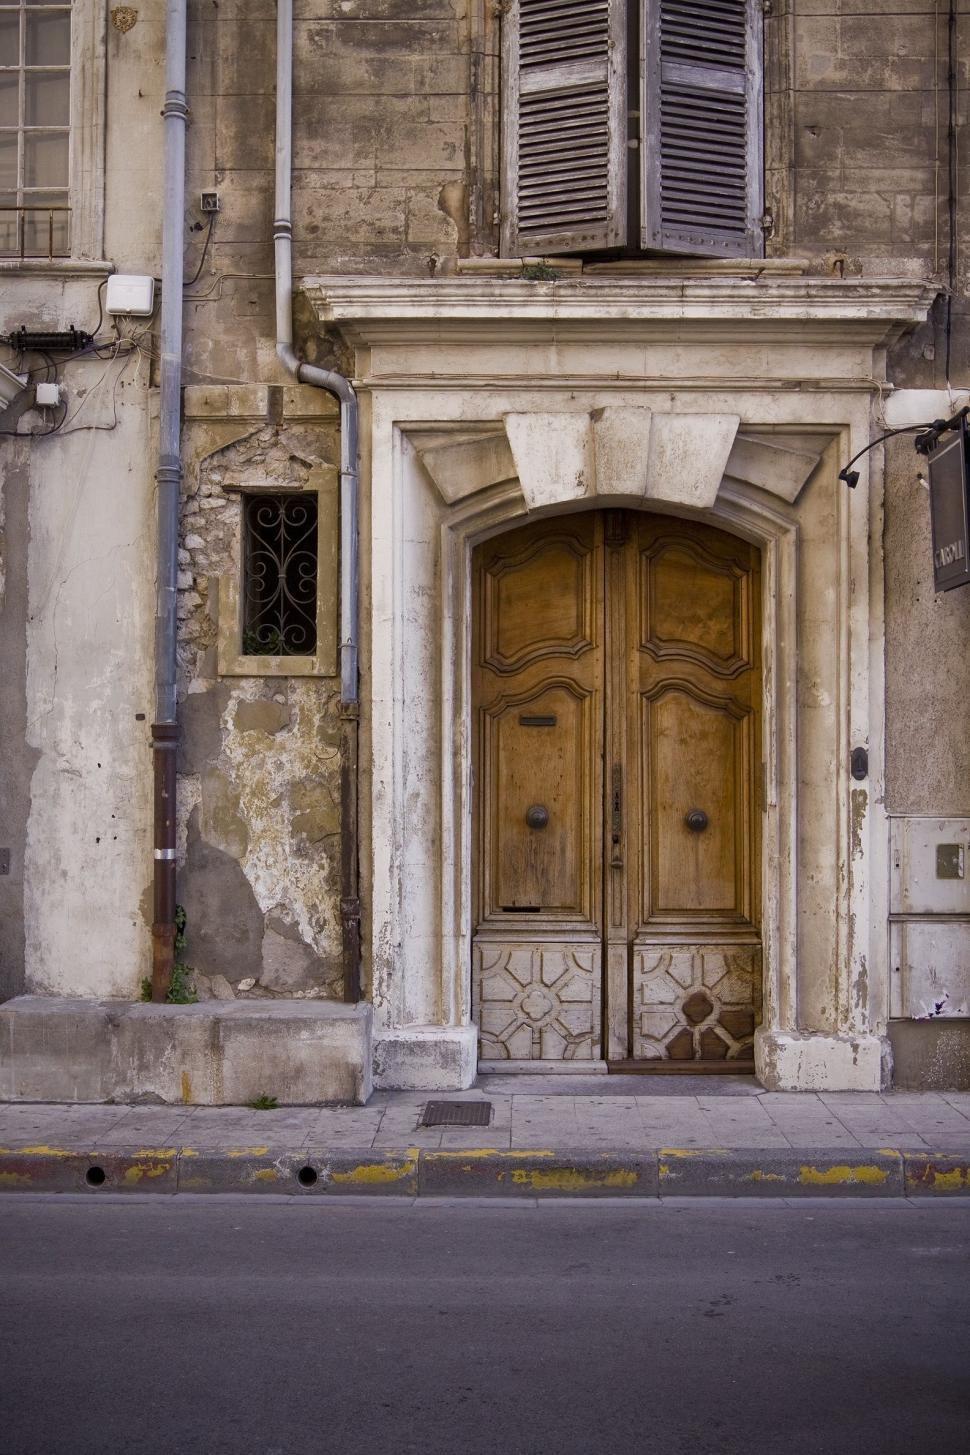 Free Image of Old Building With a Large Wooden Door 